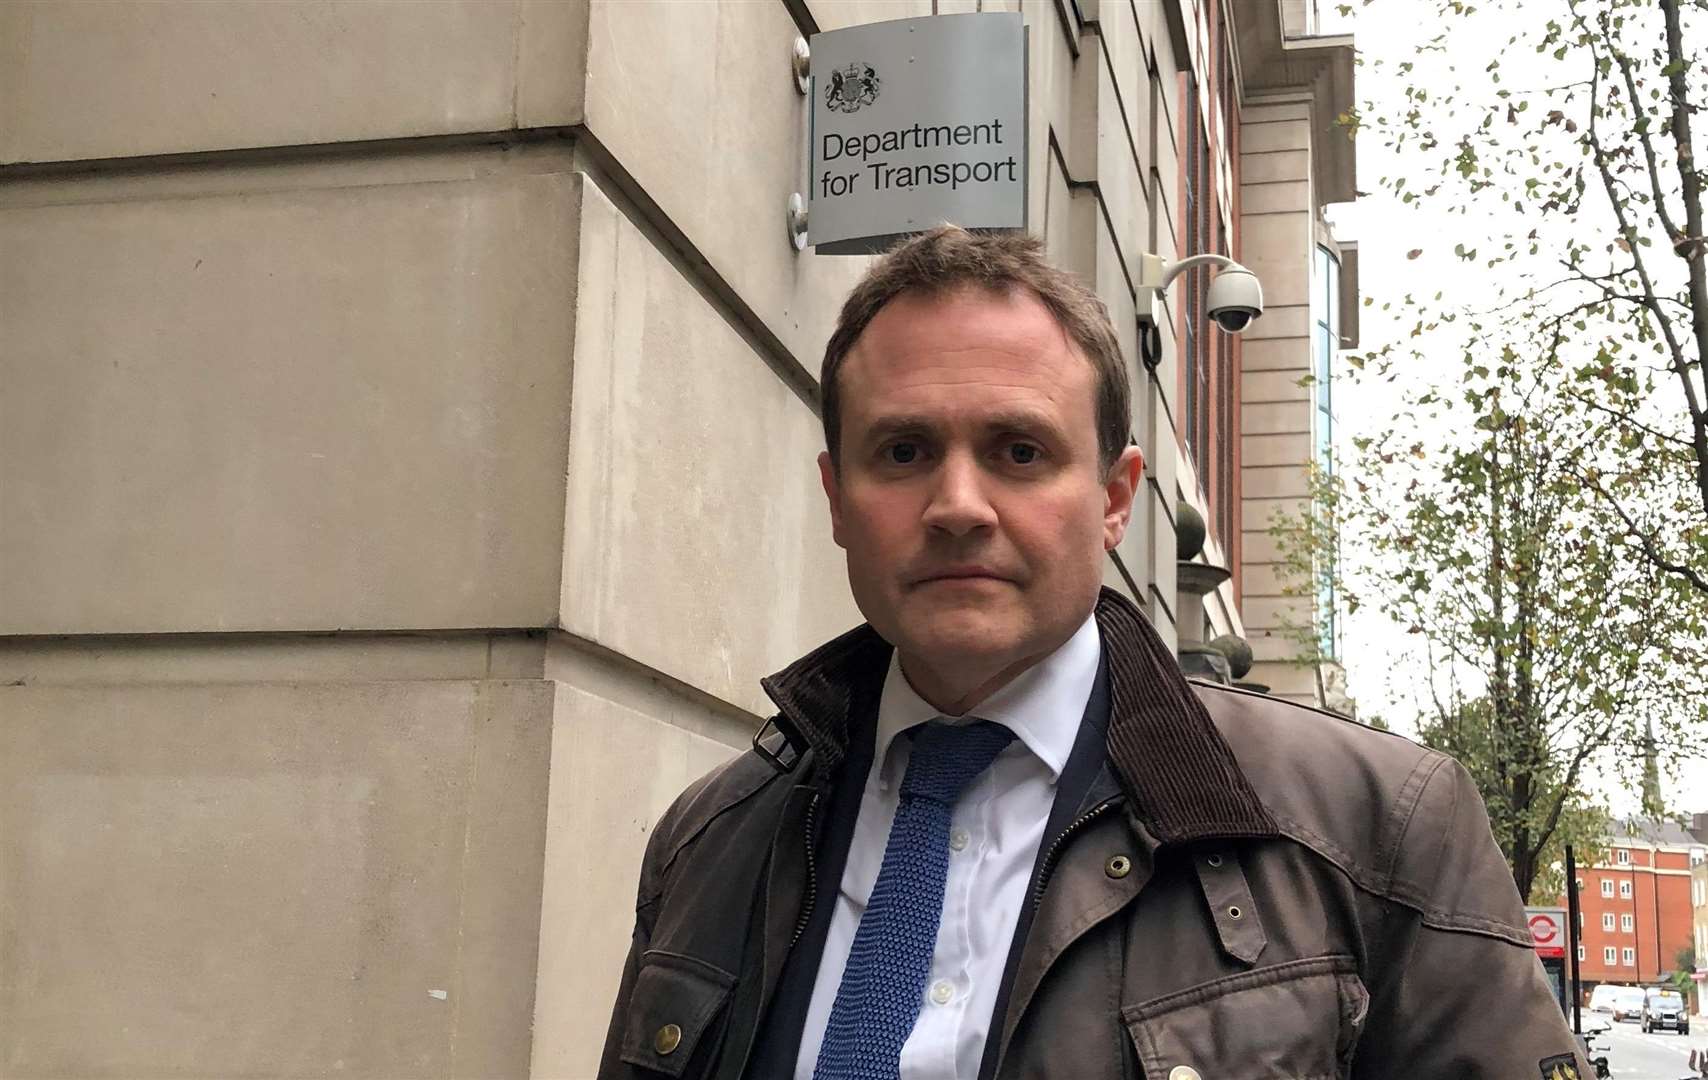 Tonbridge and Malling MP Tom Tugendhat outside the Department for Transport (5118984)